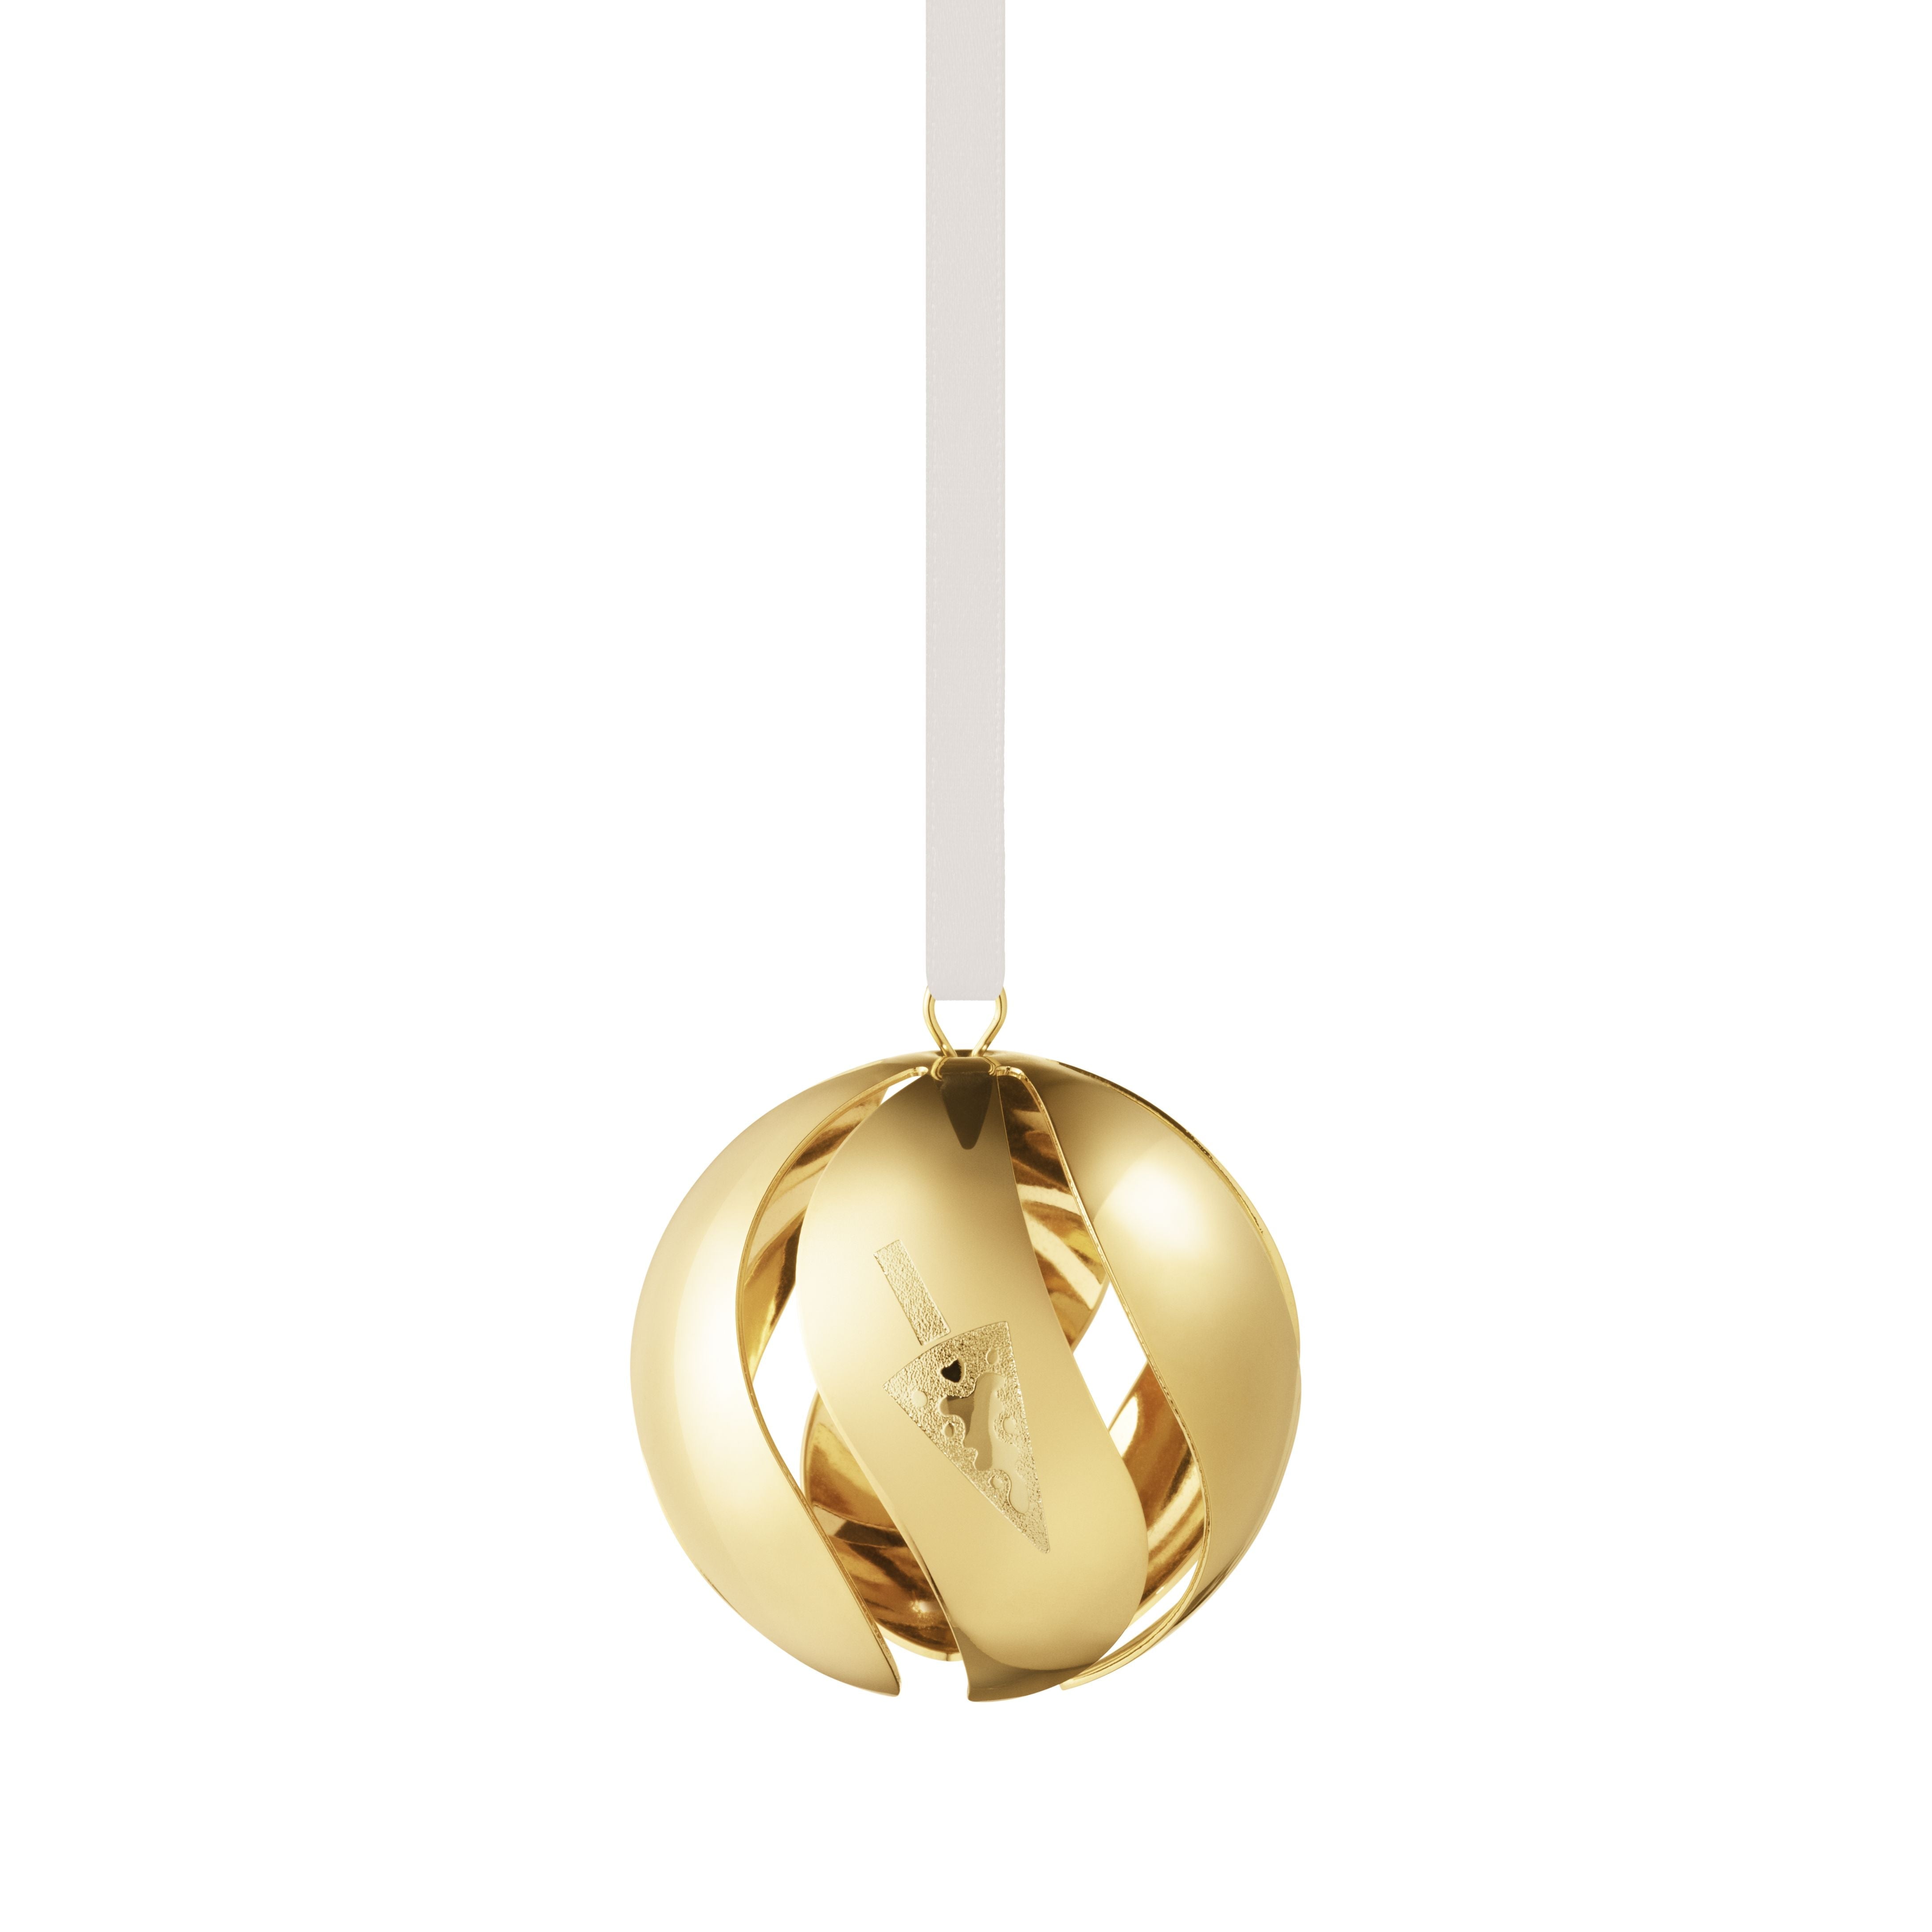 Georg Jensen Christmas Bauble, Gold Compated